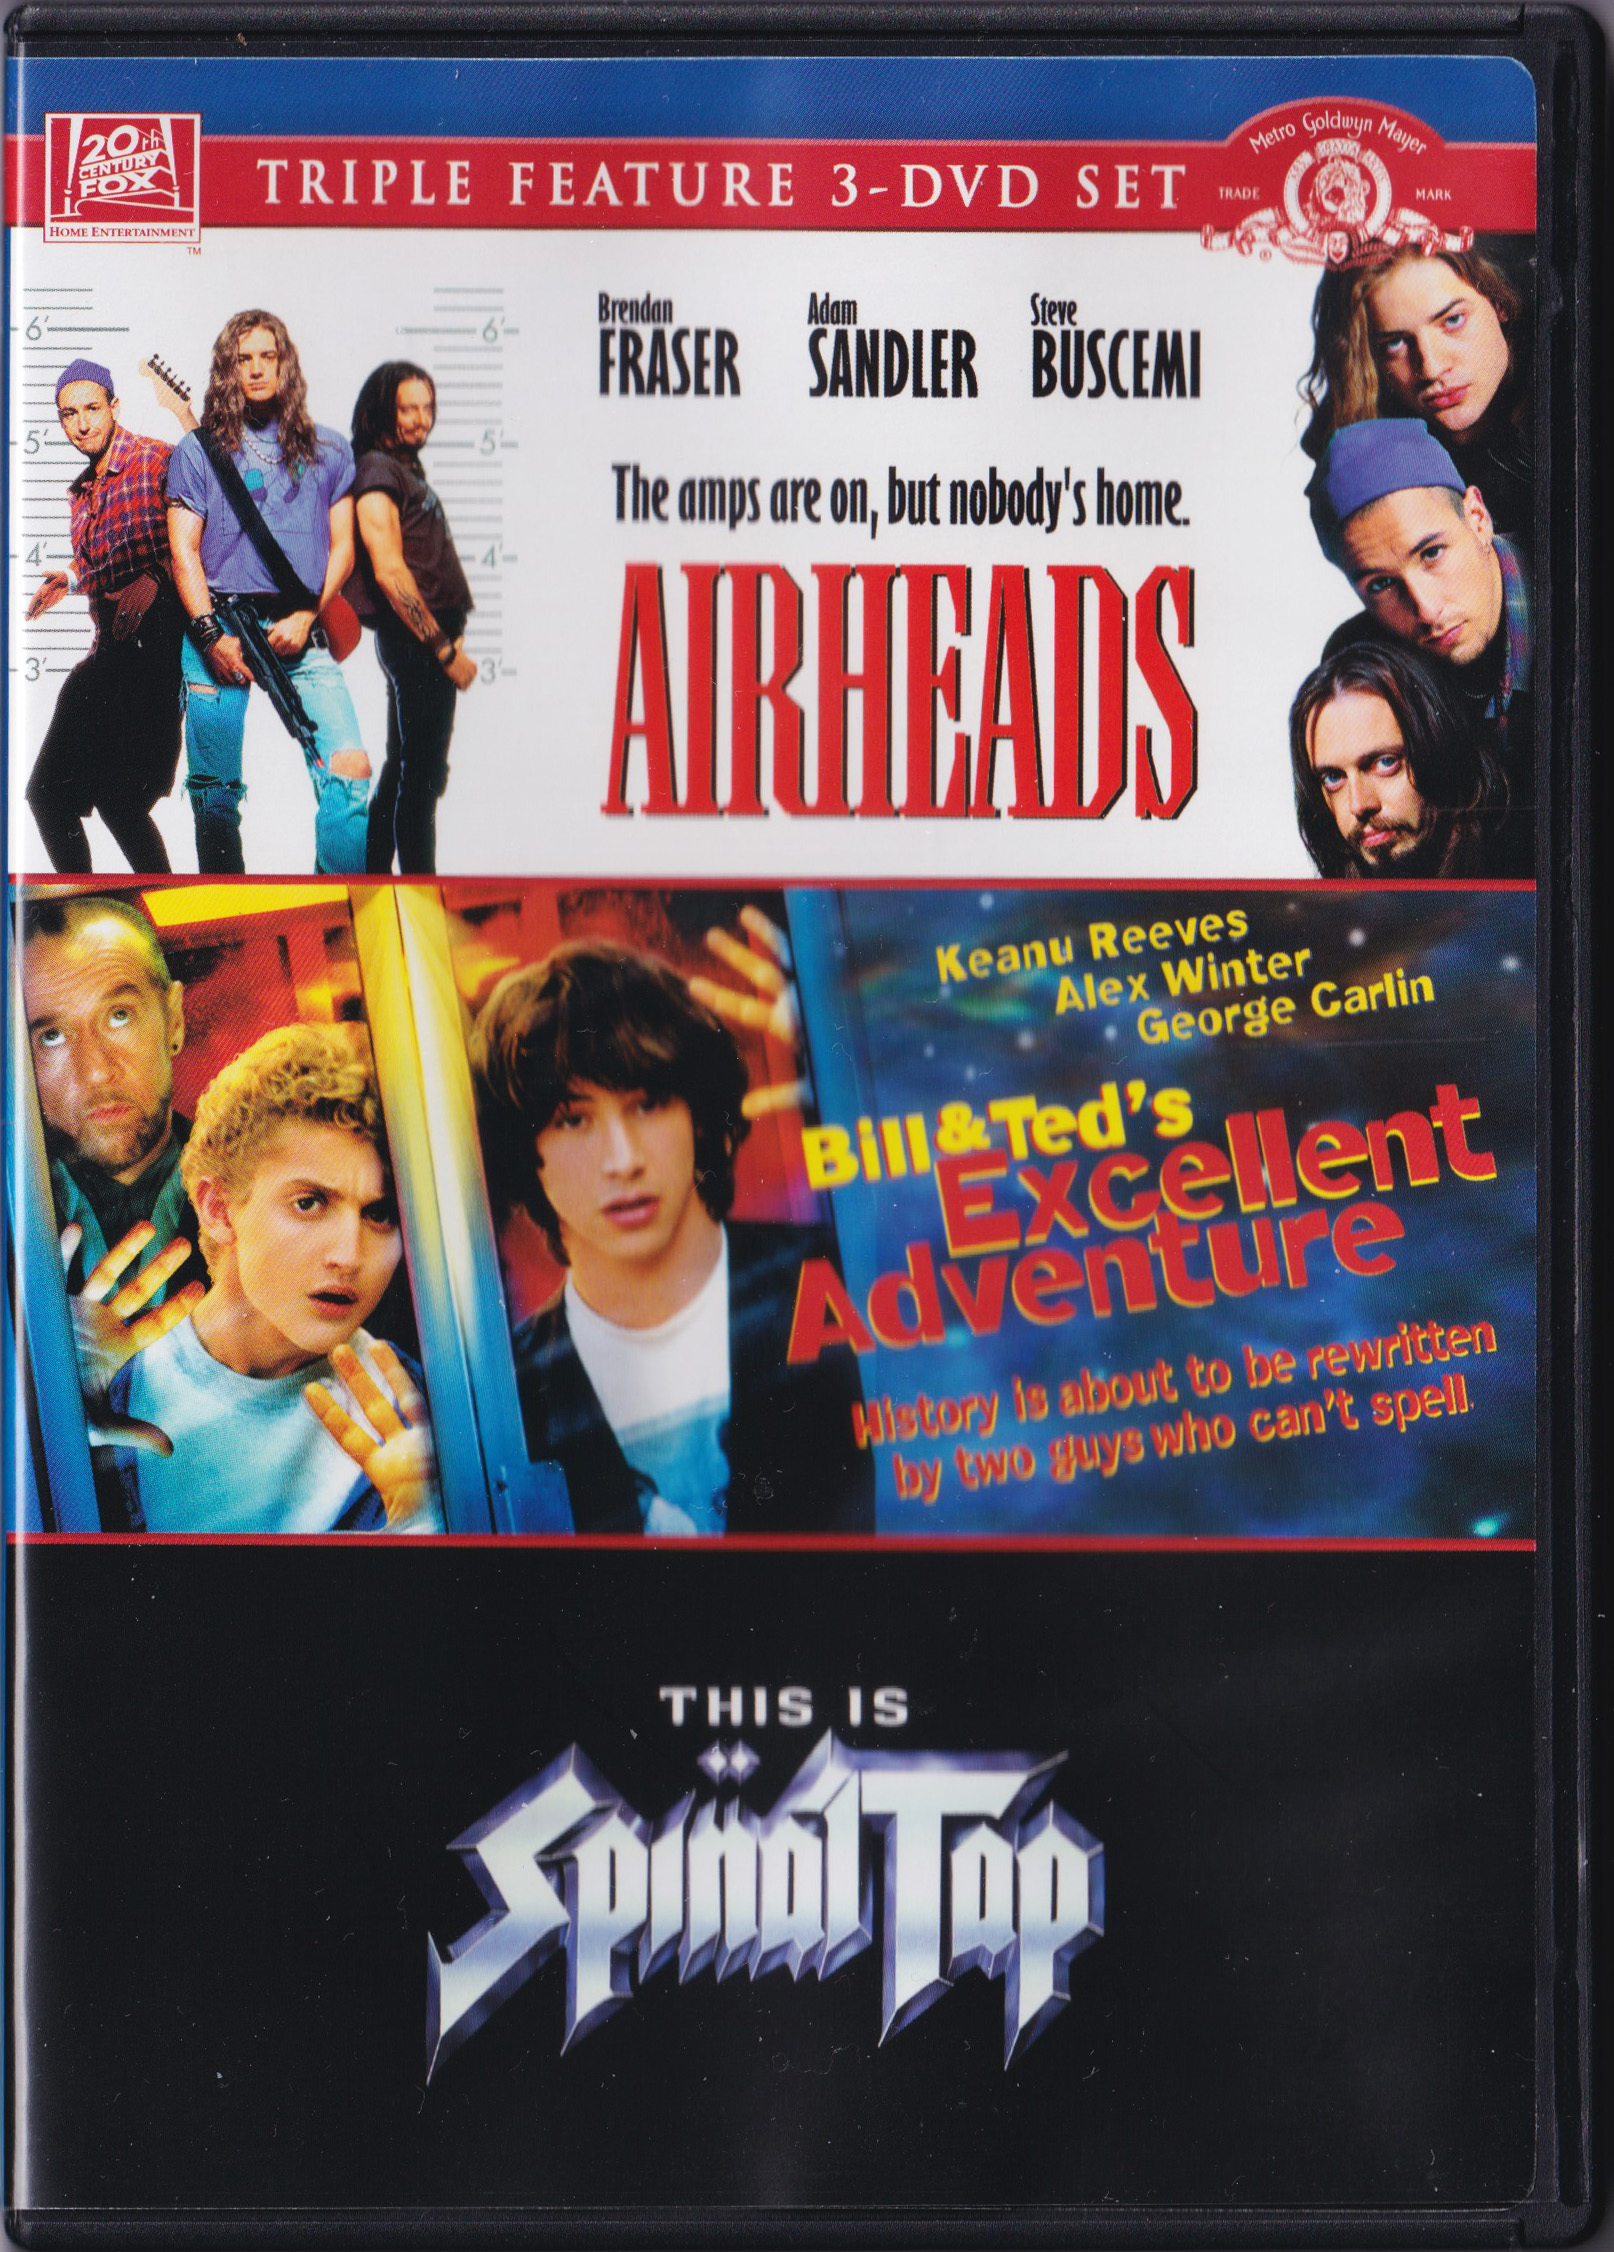 Triple Feature 3-DVD Set DVD (Airheads / Bill & Ted's Excellent